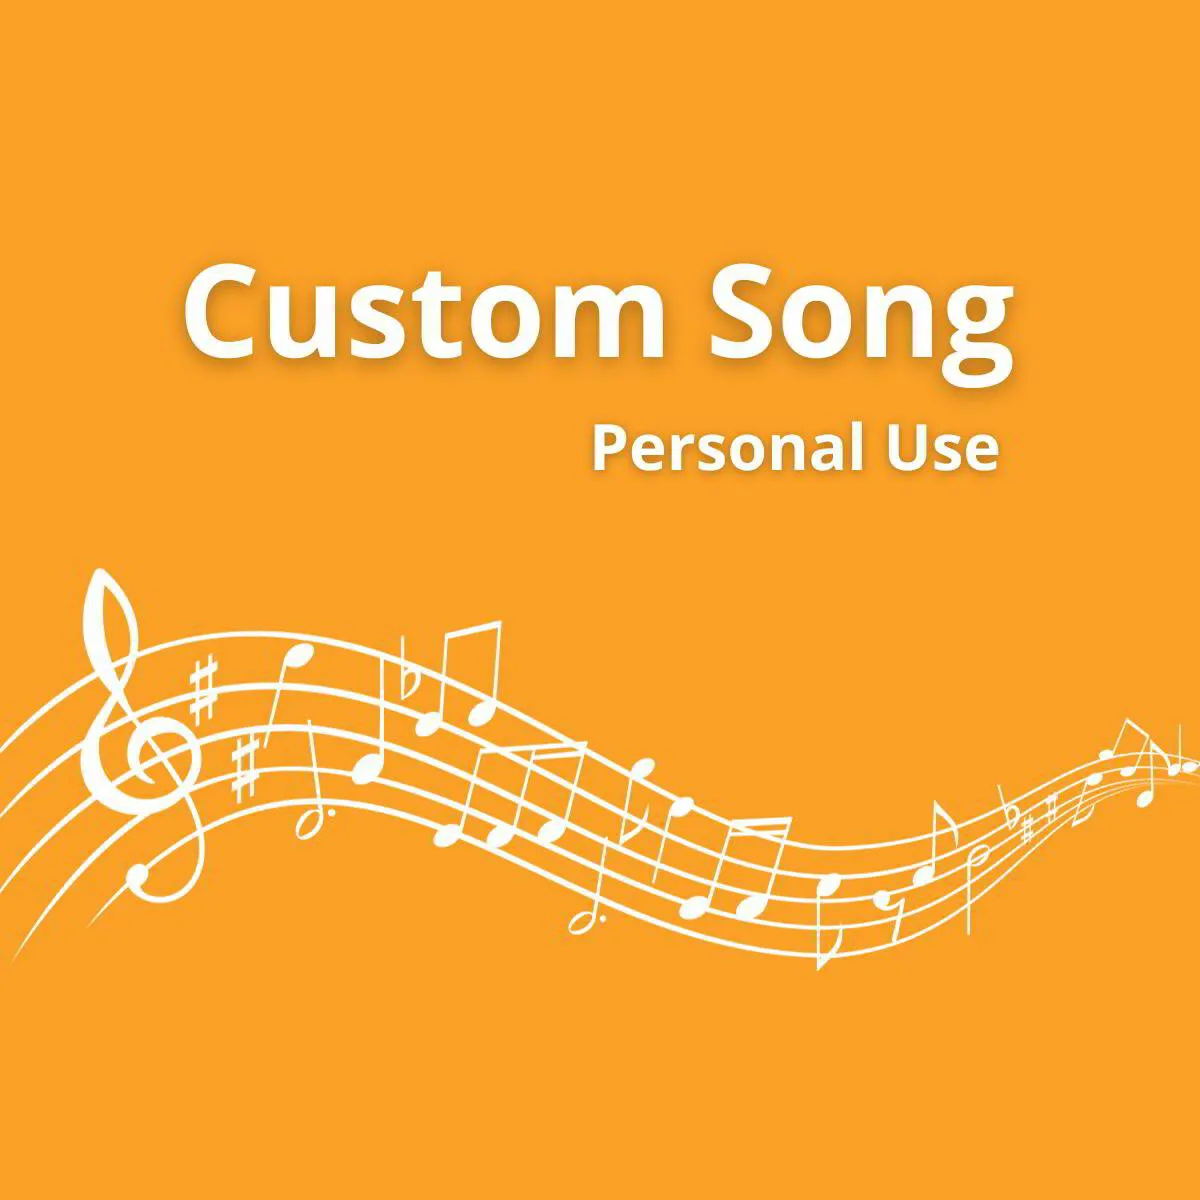 Custom Song for Personal Use